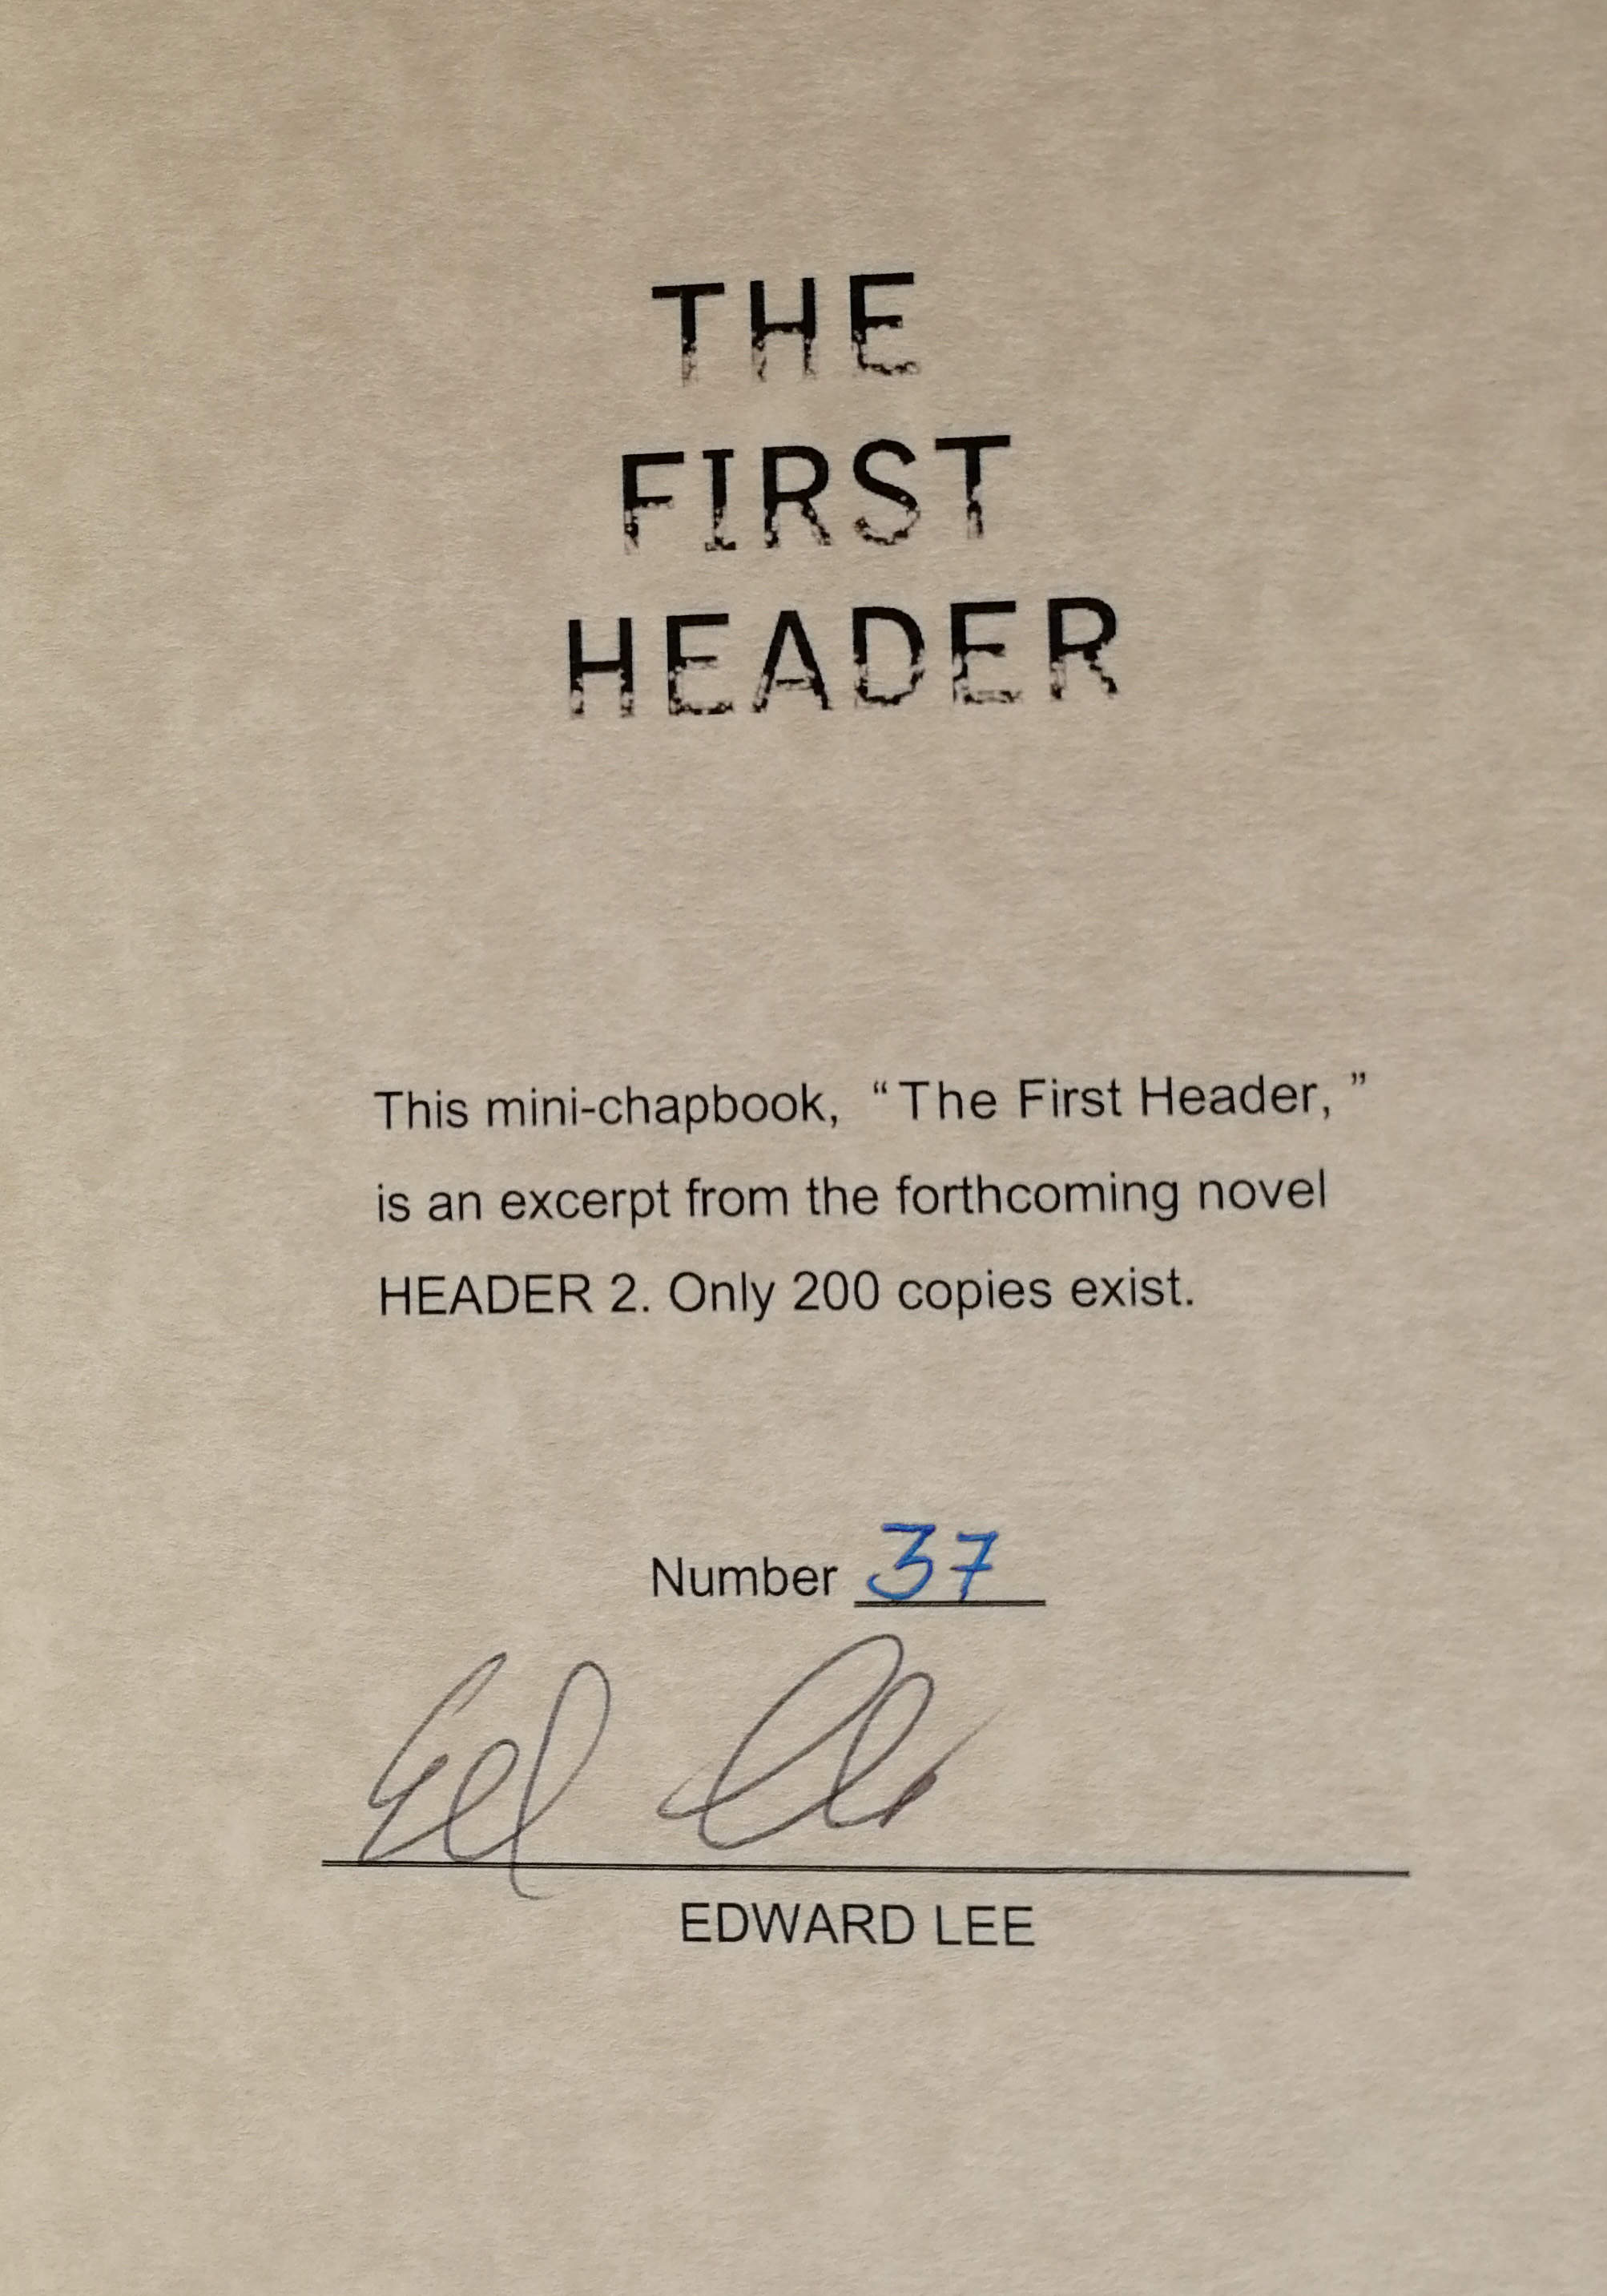 The First Header Signed Chapbook